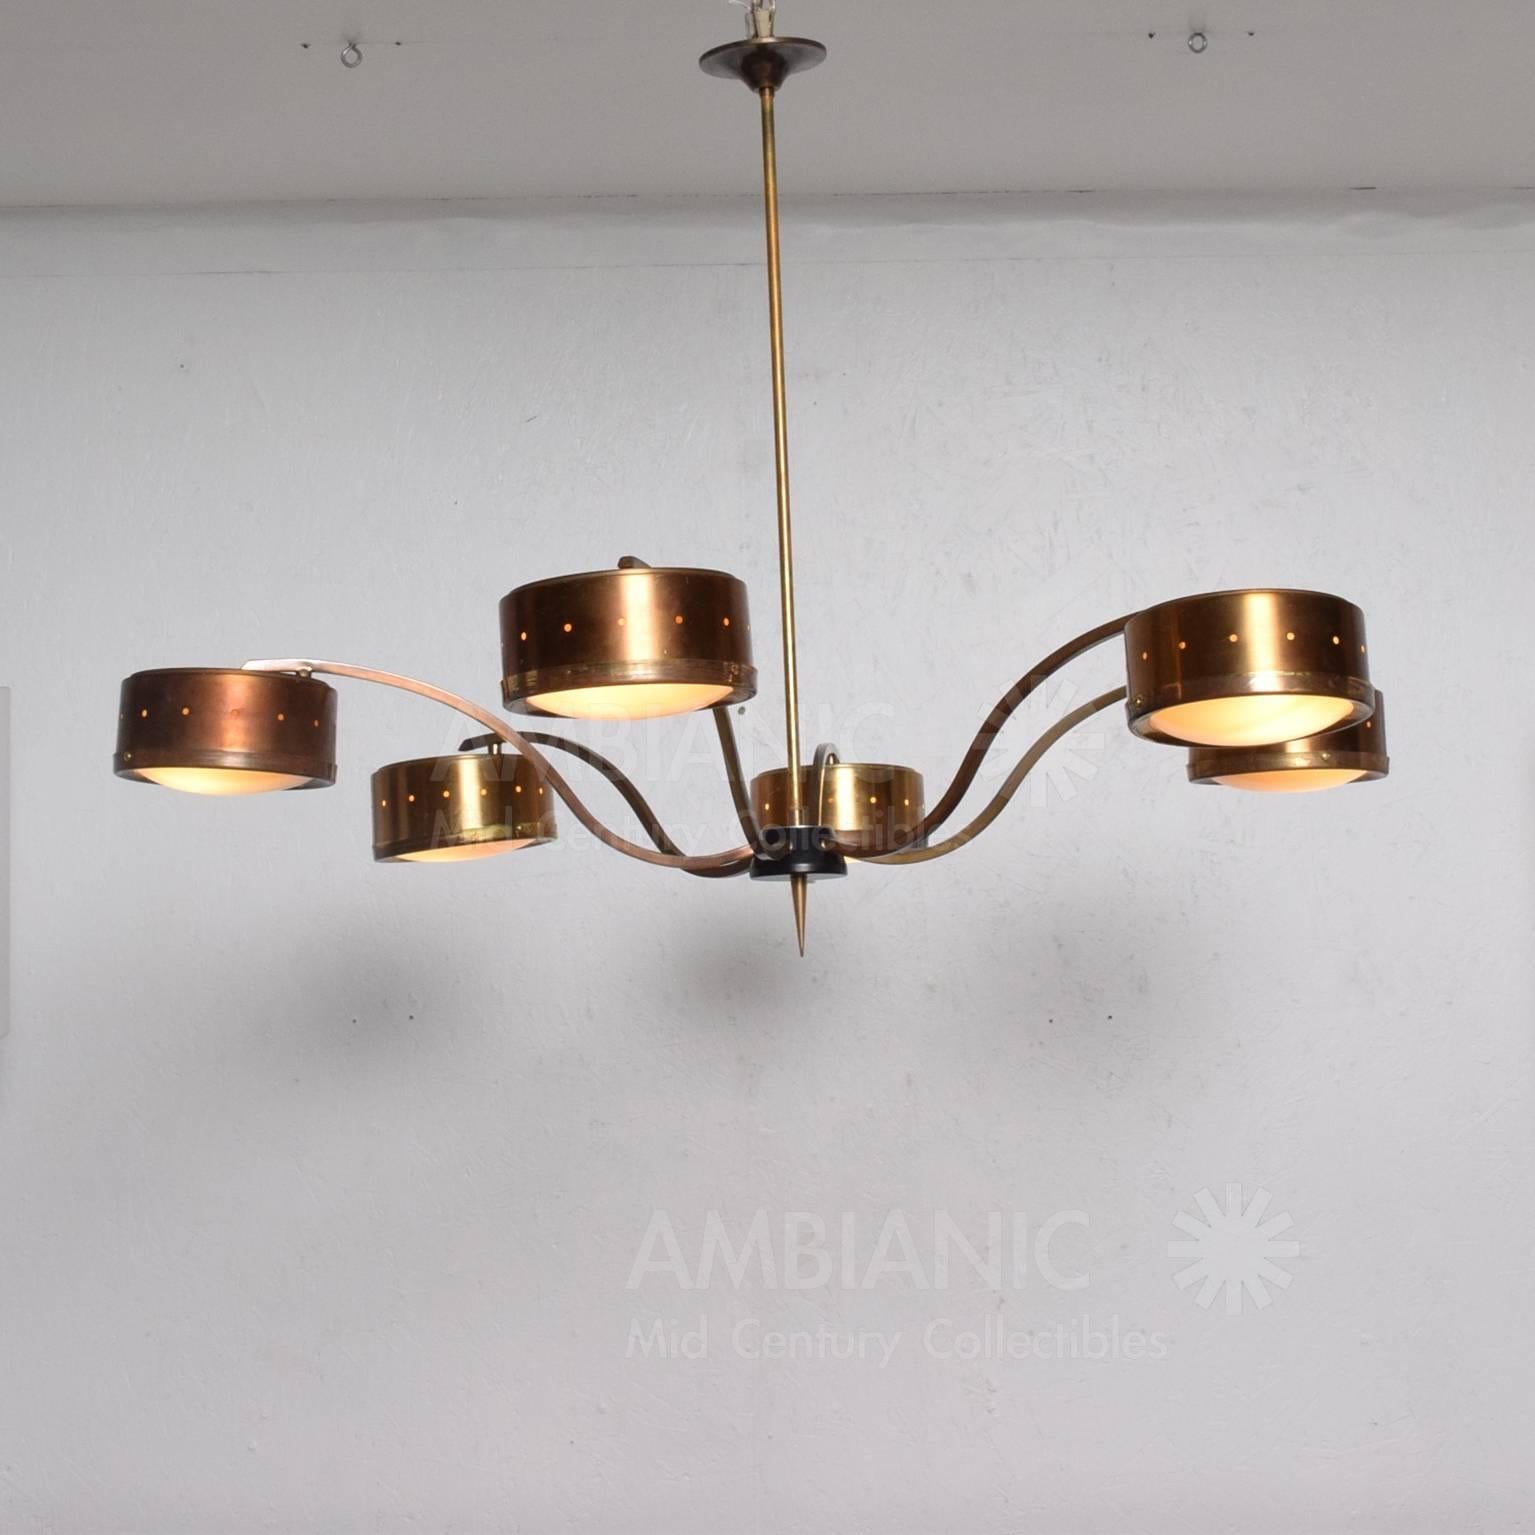 Mid-Century Modern Sculptural Chandelier with Six Arms 1